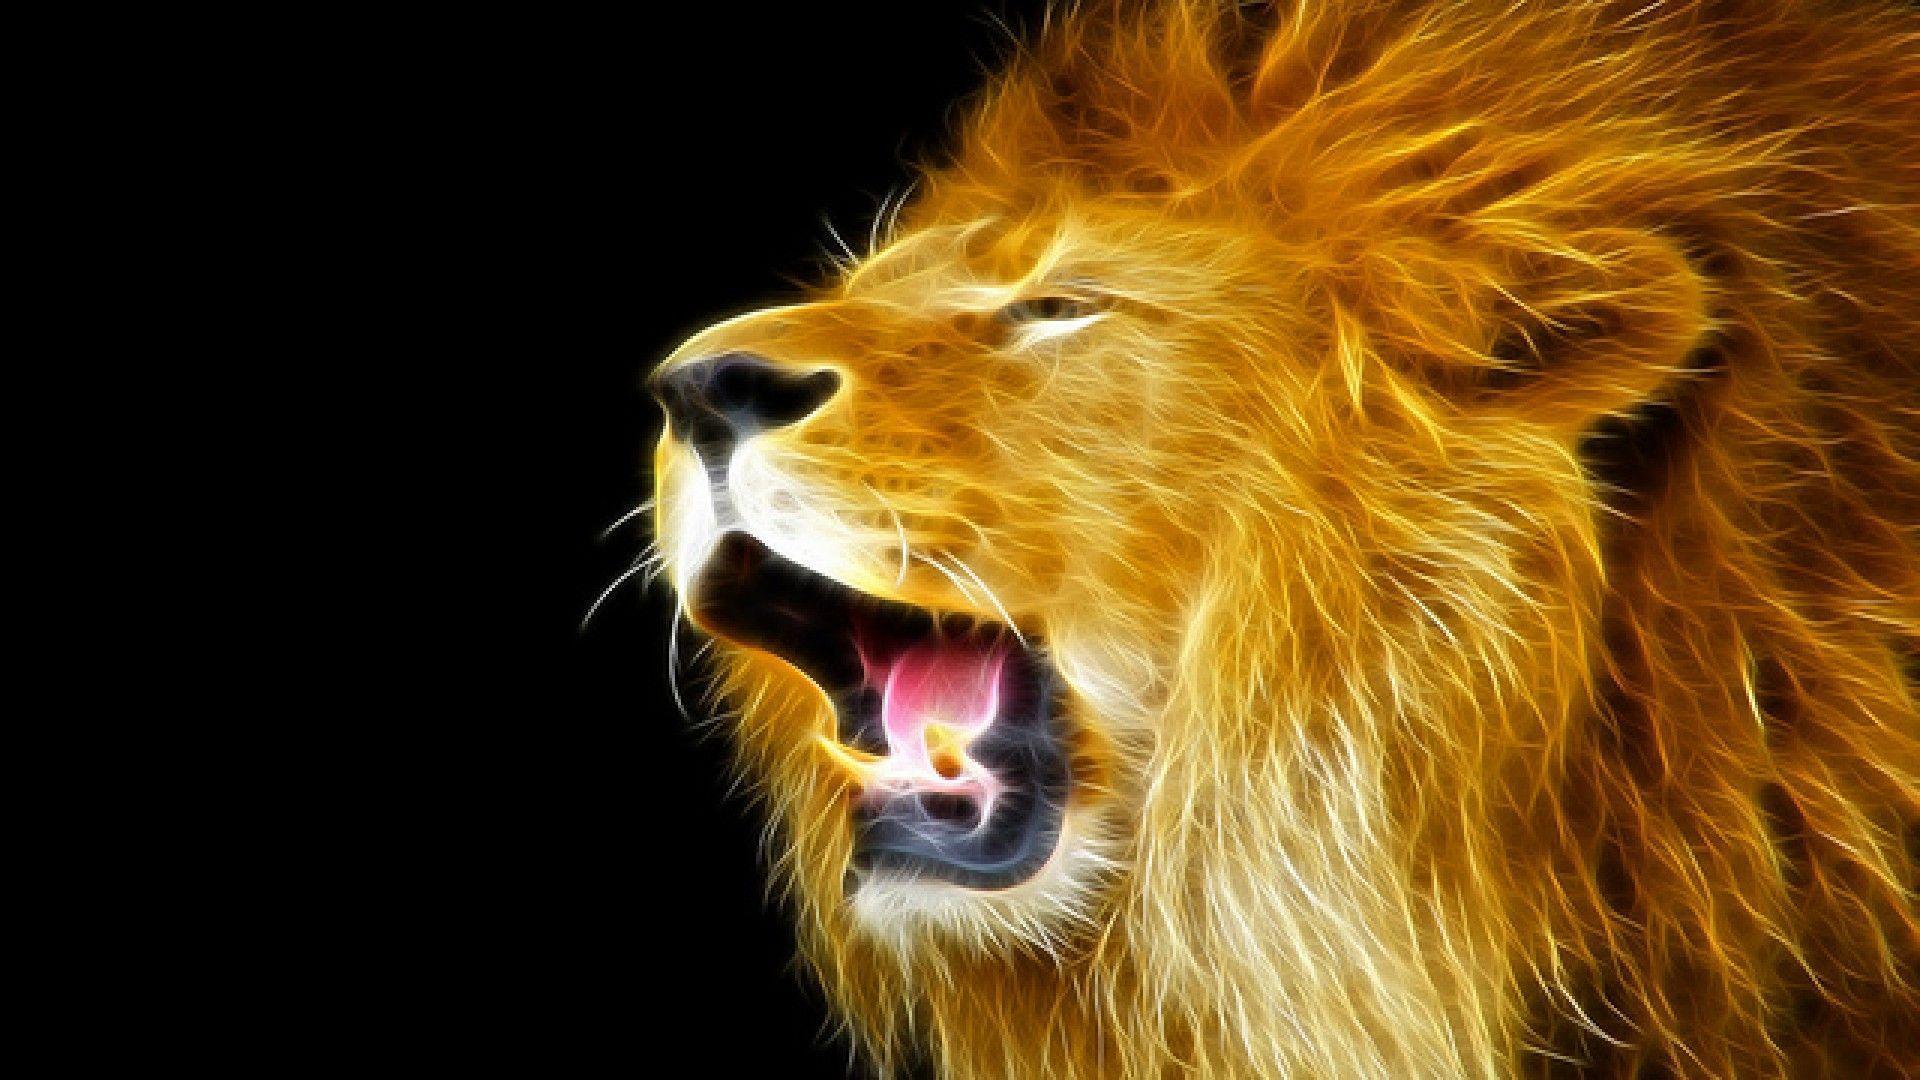 Lion HD Wallpapers - Wallpaper Cave